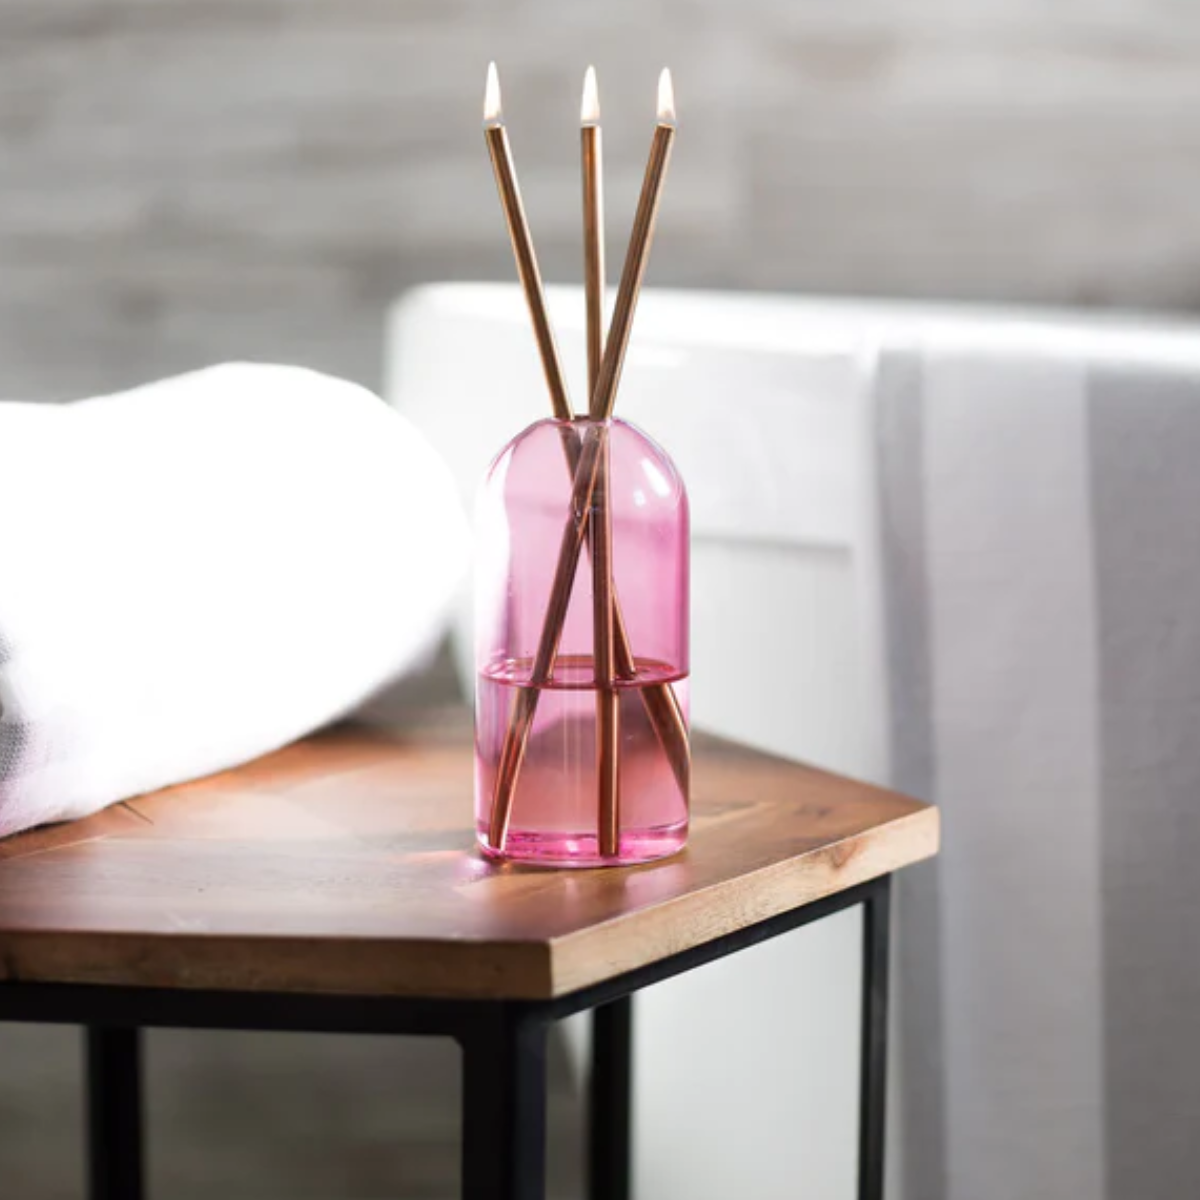 PINK LADY VASE by EVERLASTING CANDLE CO.